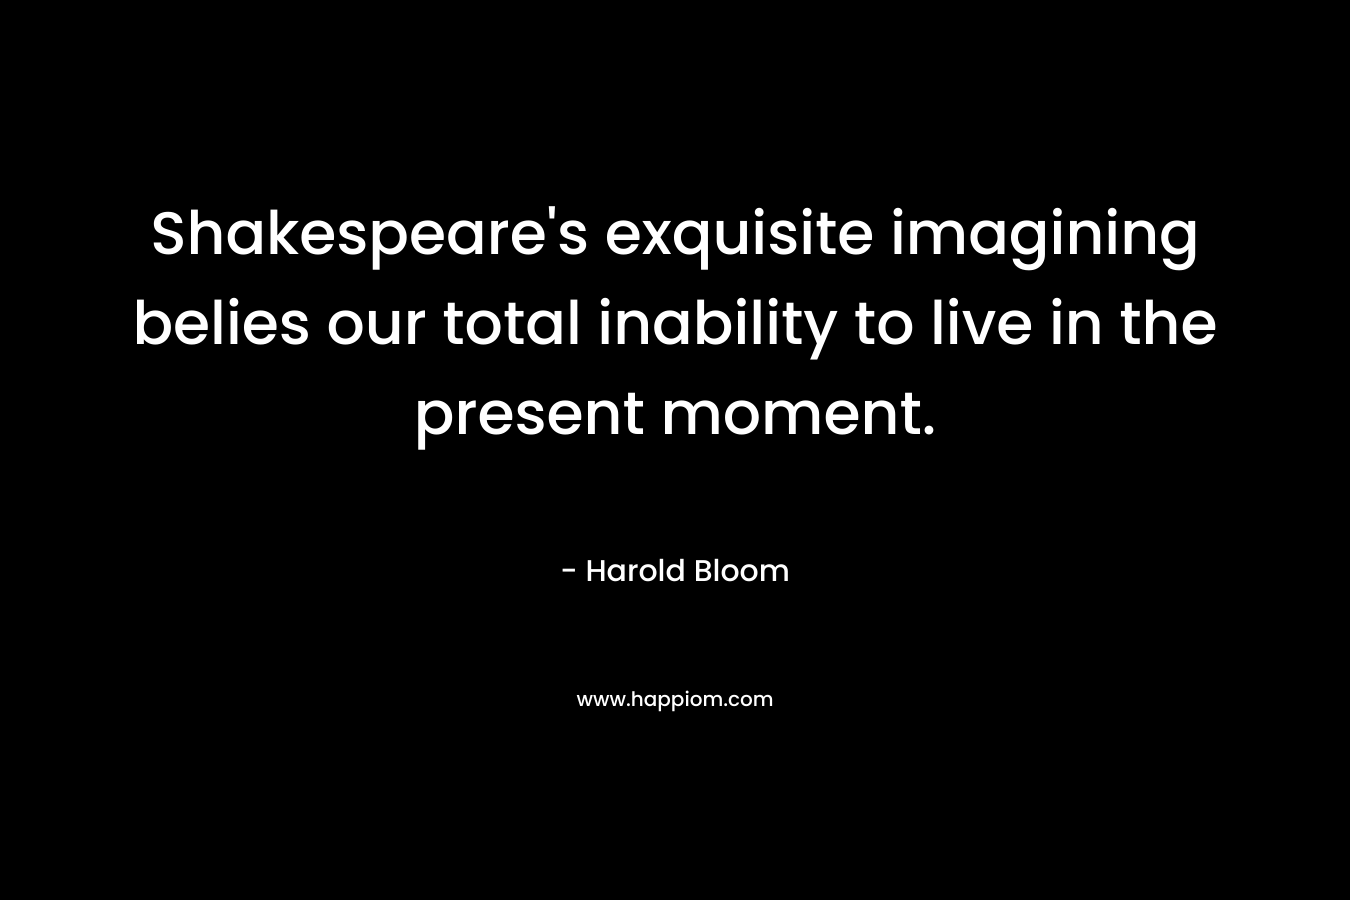 Shakespeare's exquisite imagining belies our total inability to live in the present moment.